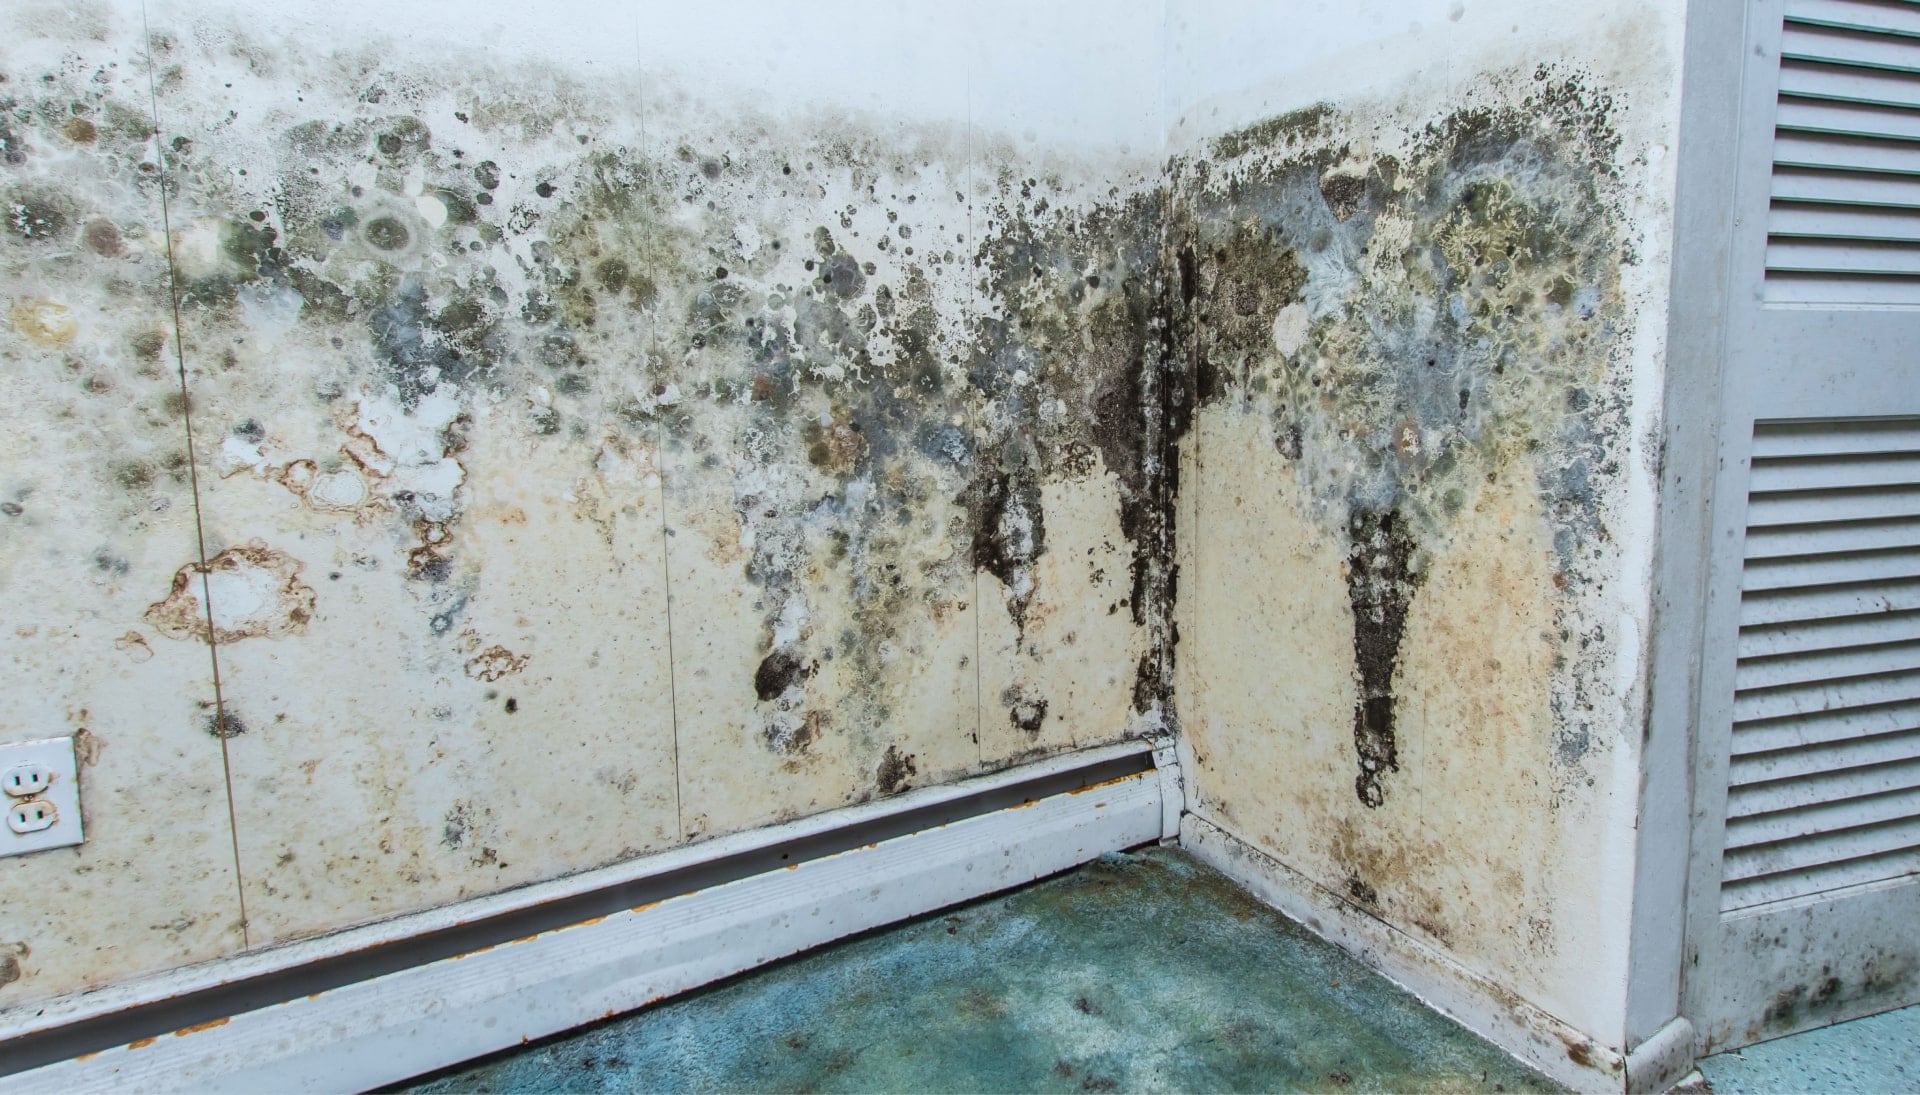 Professional mold removal, odor control, and water damage restoration service in Philadelphia, Pennsylvania.